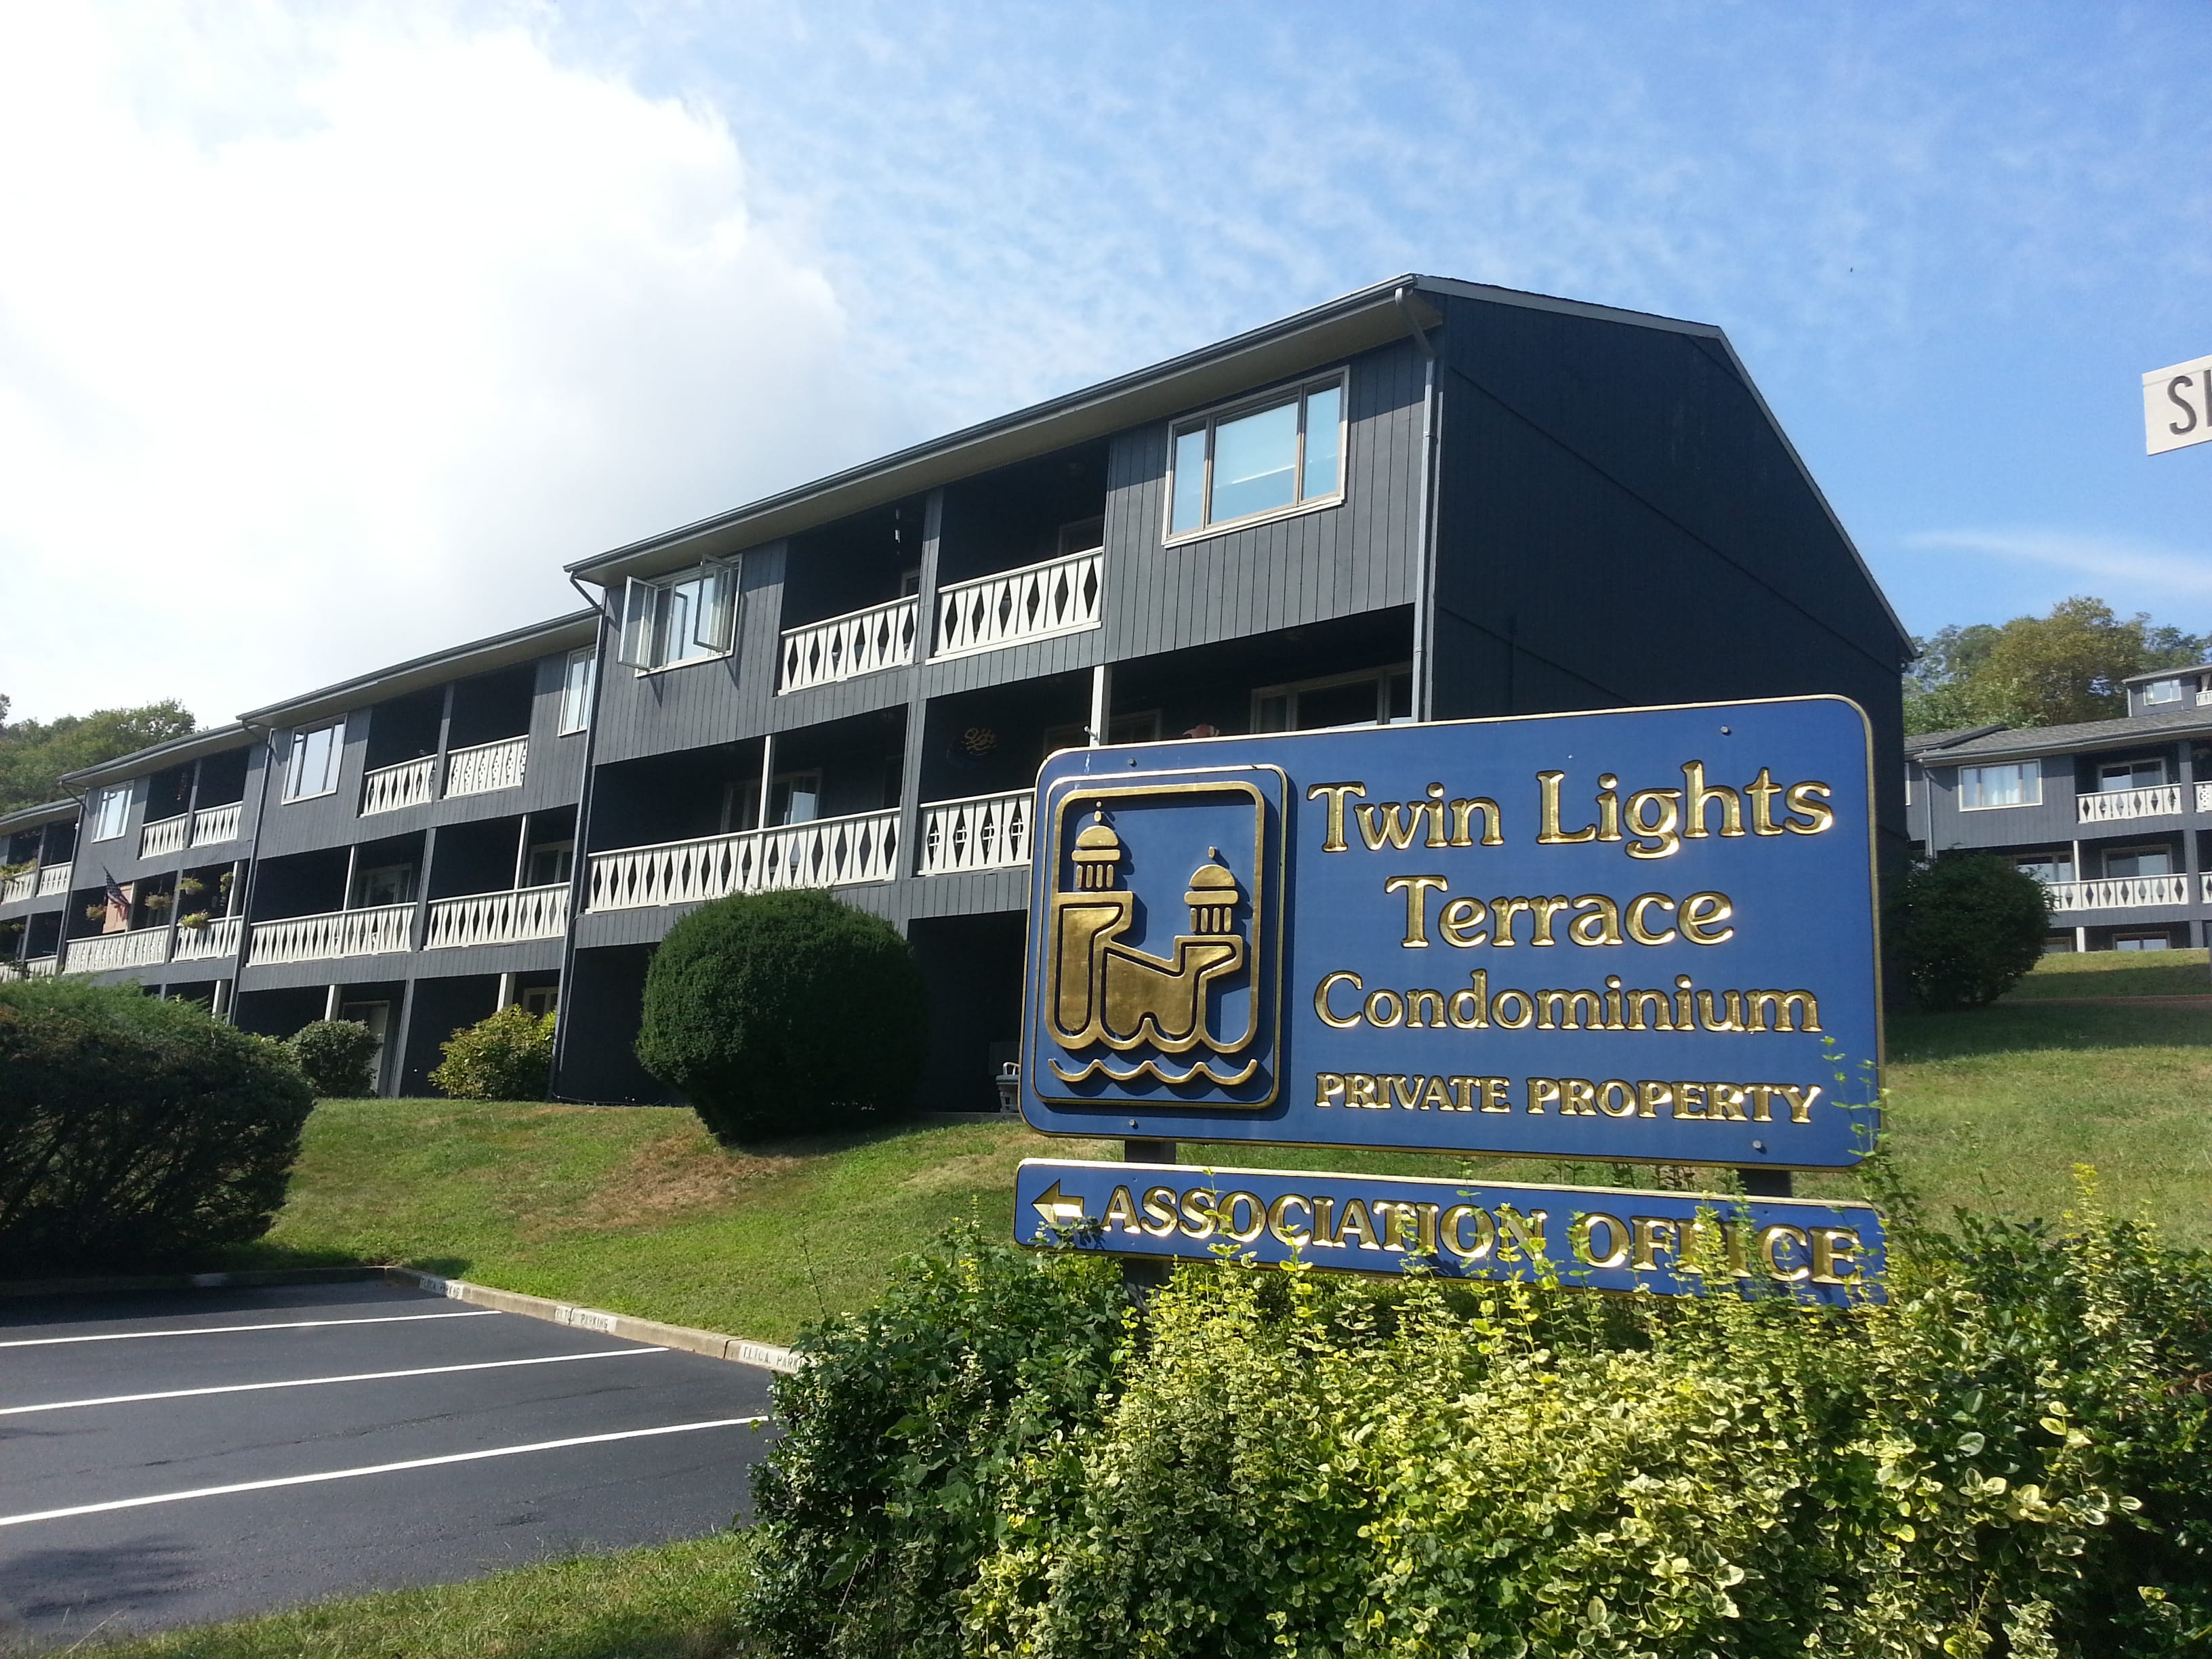 Twin Lights Terrace is a community of one and two bedroom condos overlooking the ocean and river.